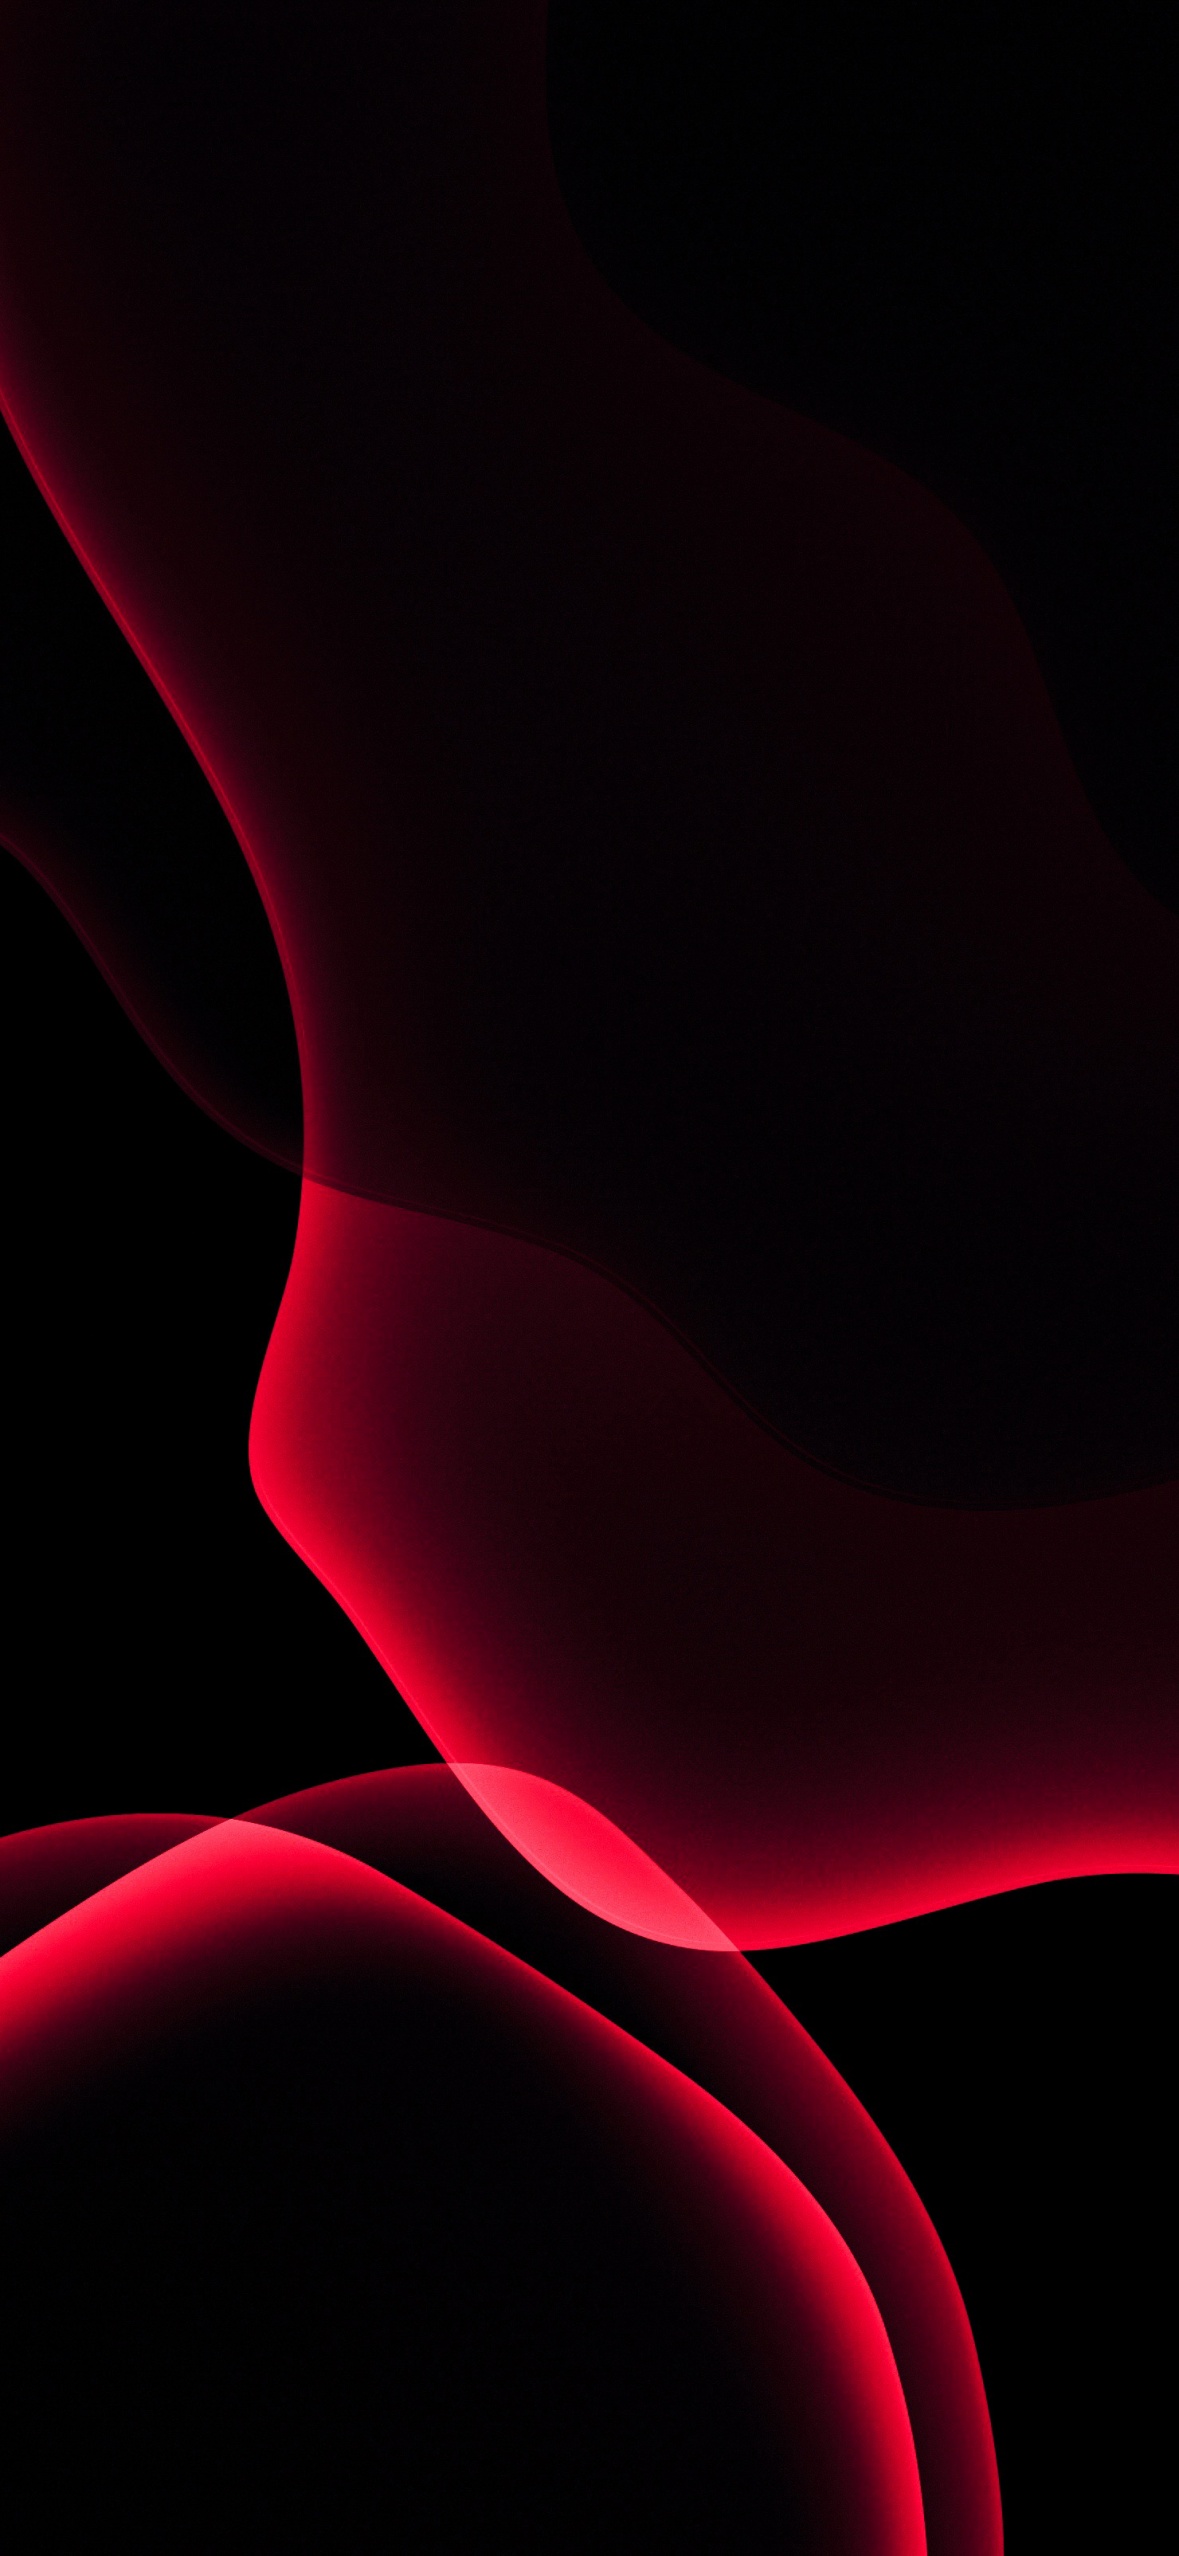 HD wallpaper: Red Pattern, Aero, Patterns, black and red pattern,  backgrounds | Wallpaper Flare